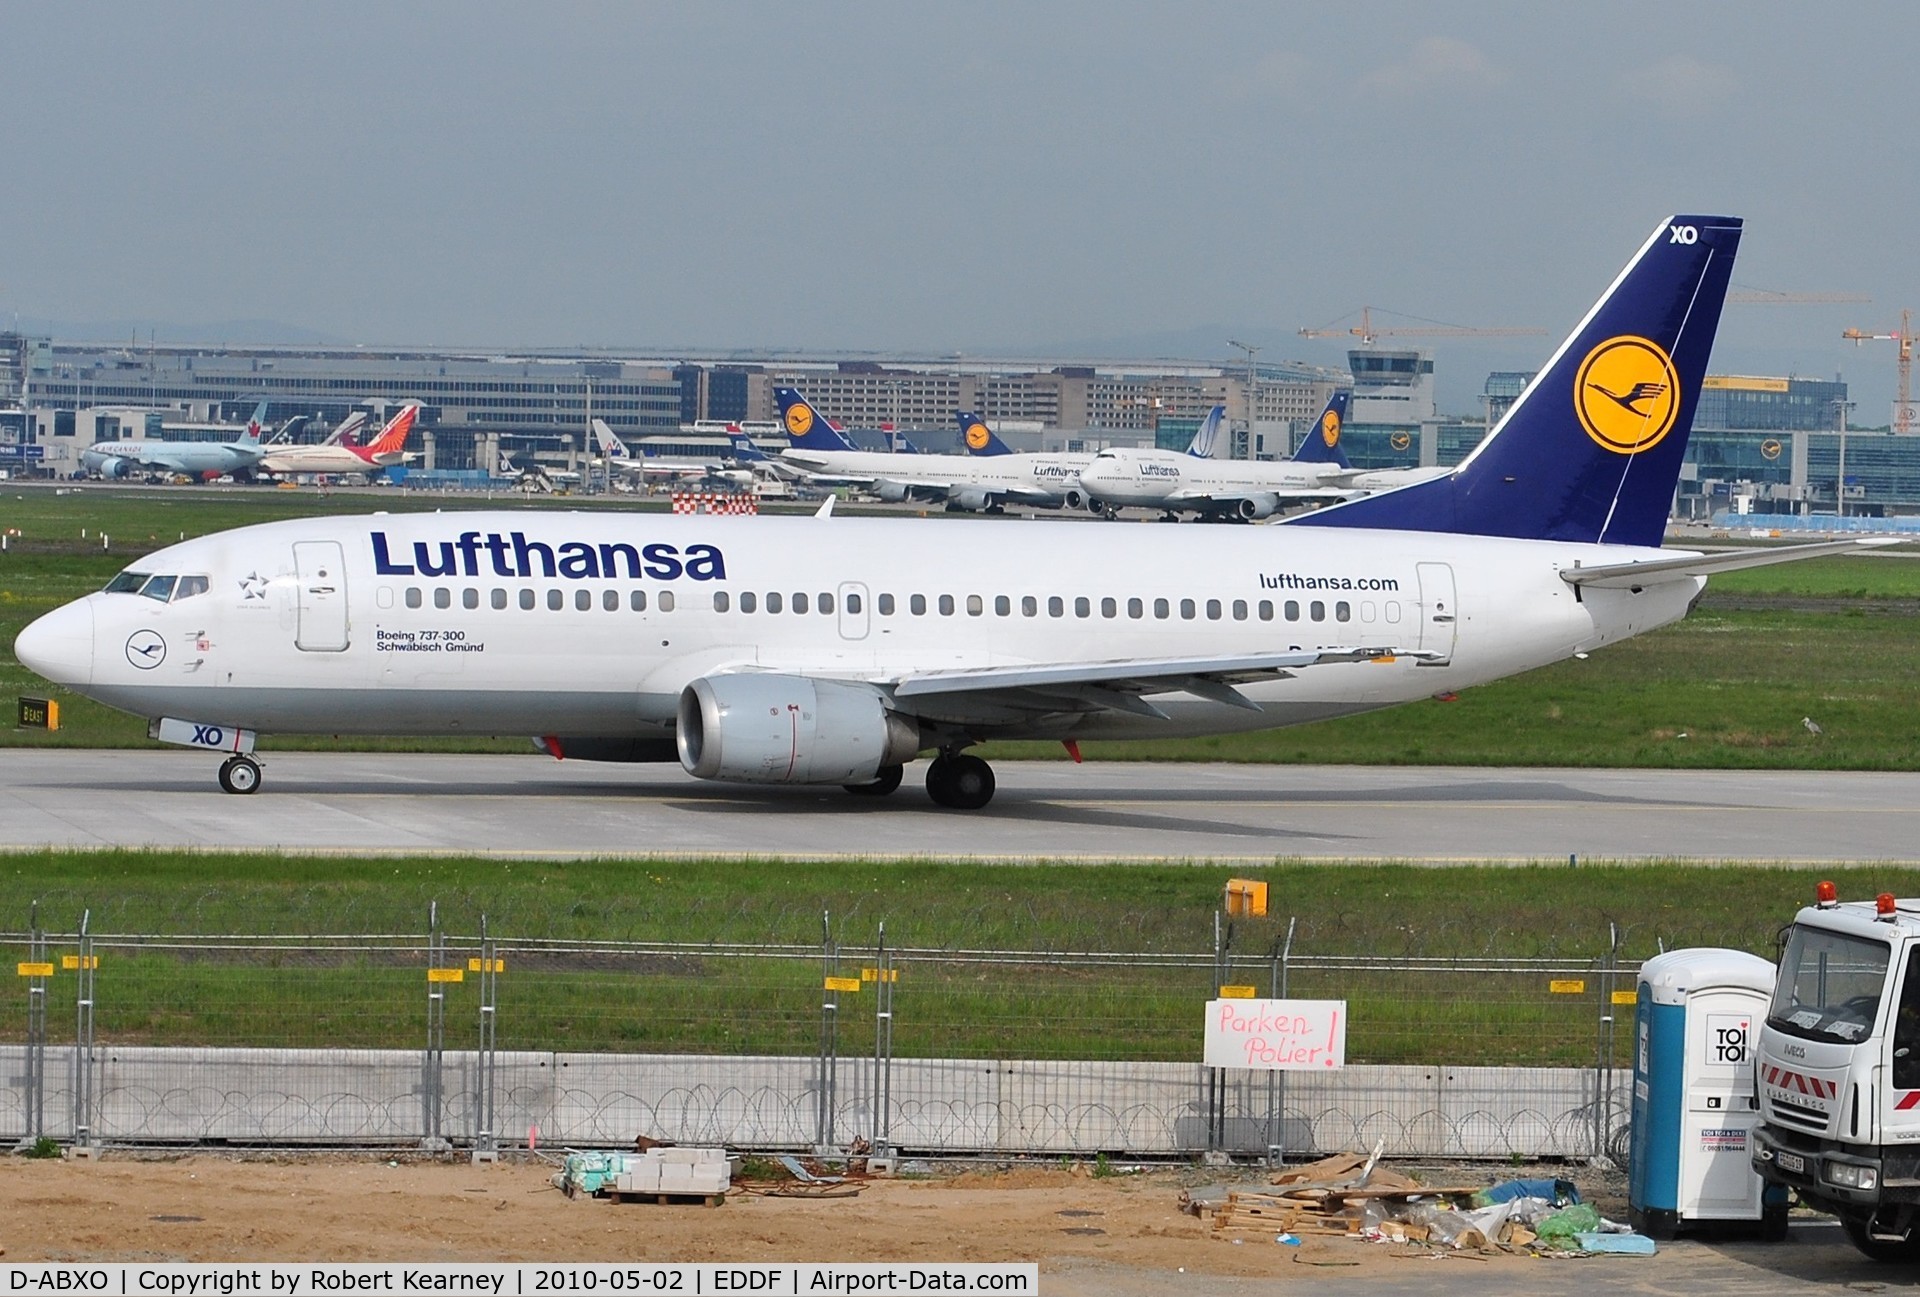 D-ABXO, 1987 Boeing 737-330 C/N 23873, Lufthansa heading for tha far r/w with early morning traffic in the background